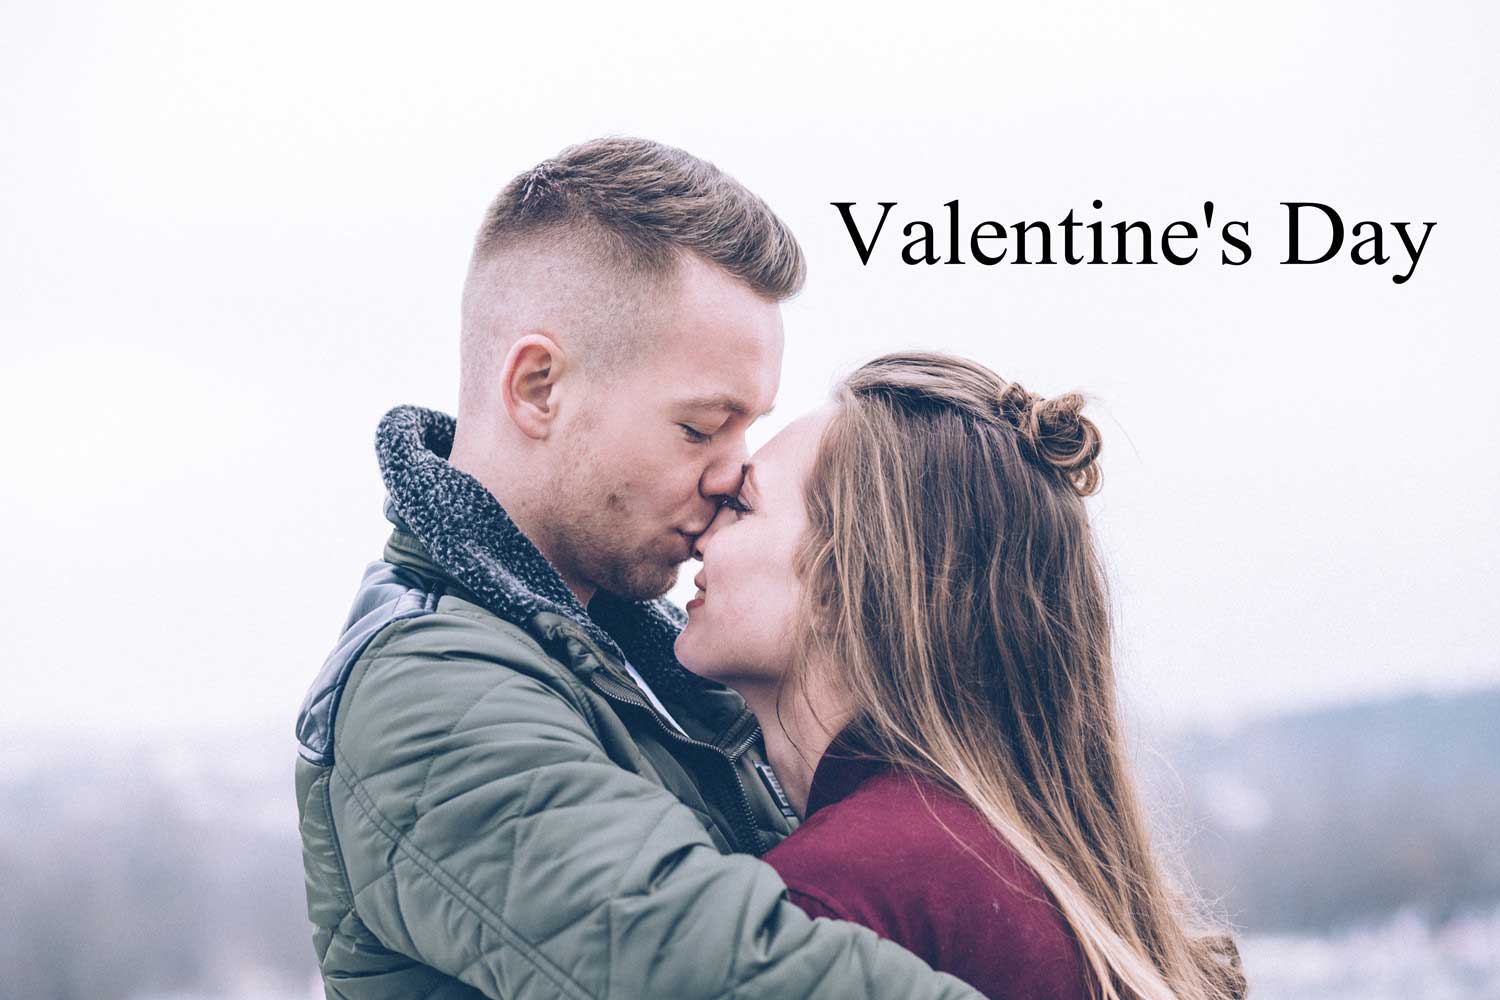 5 Ideas Ways to Make Valentine’s Day Special at Home in 2021